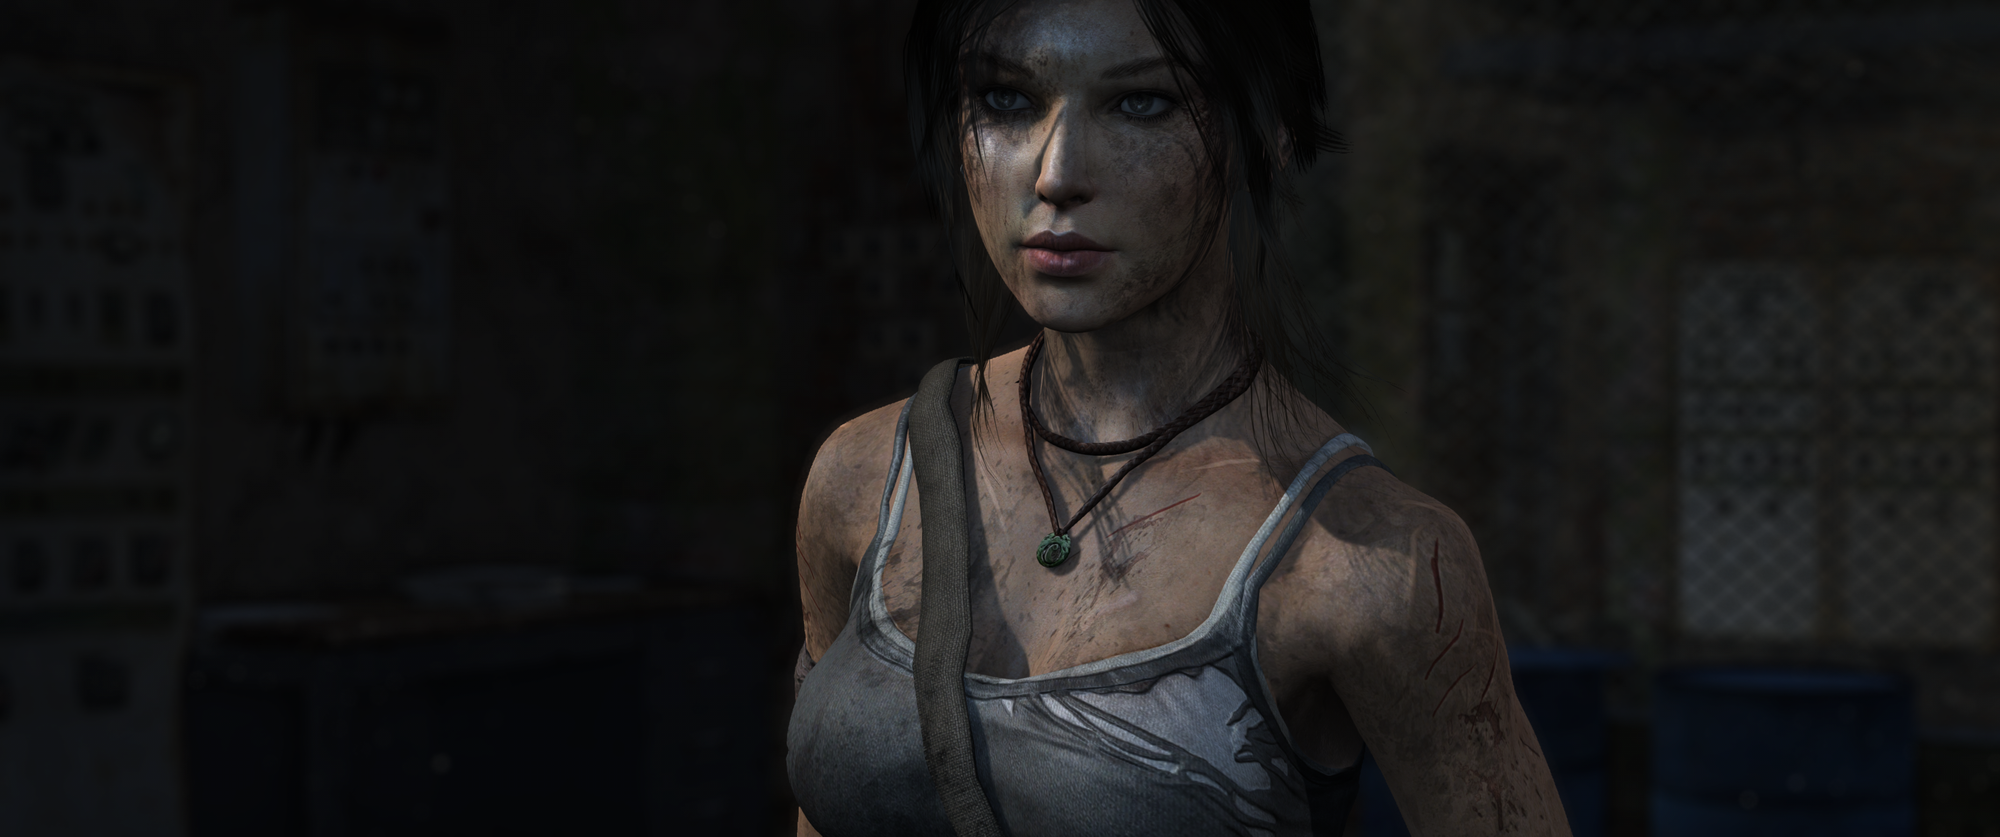 TombRaider_2018_07_25_17_15_25_942.png